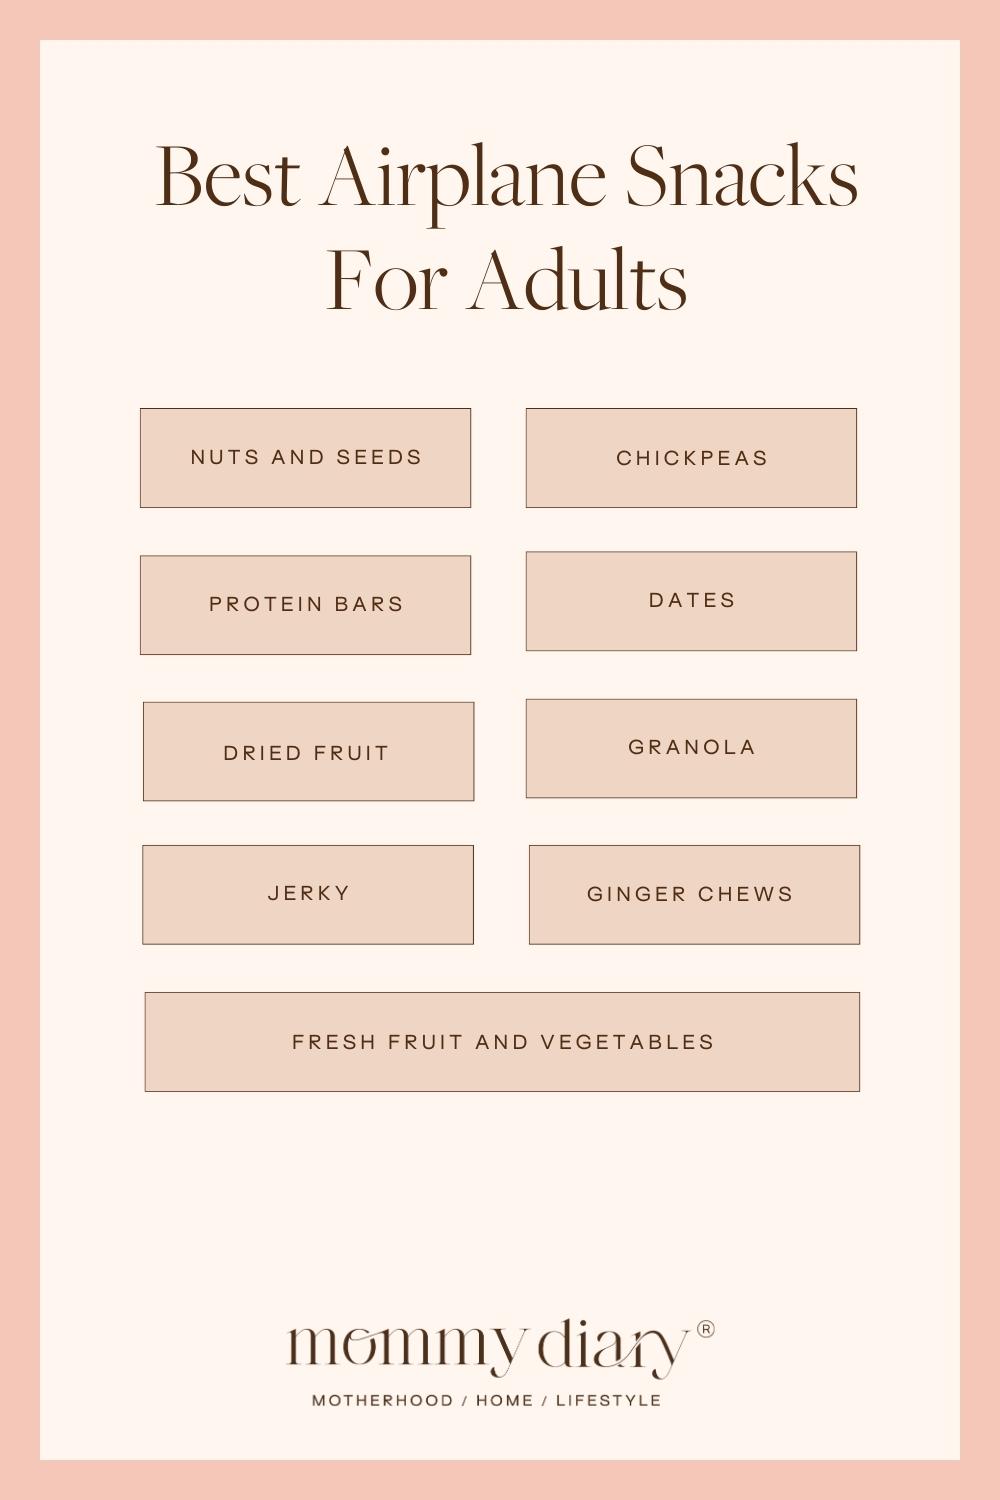 Snacks To Take On A Plane For Adults